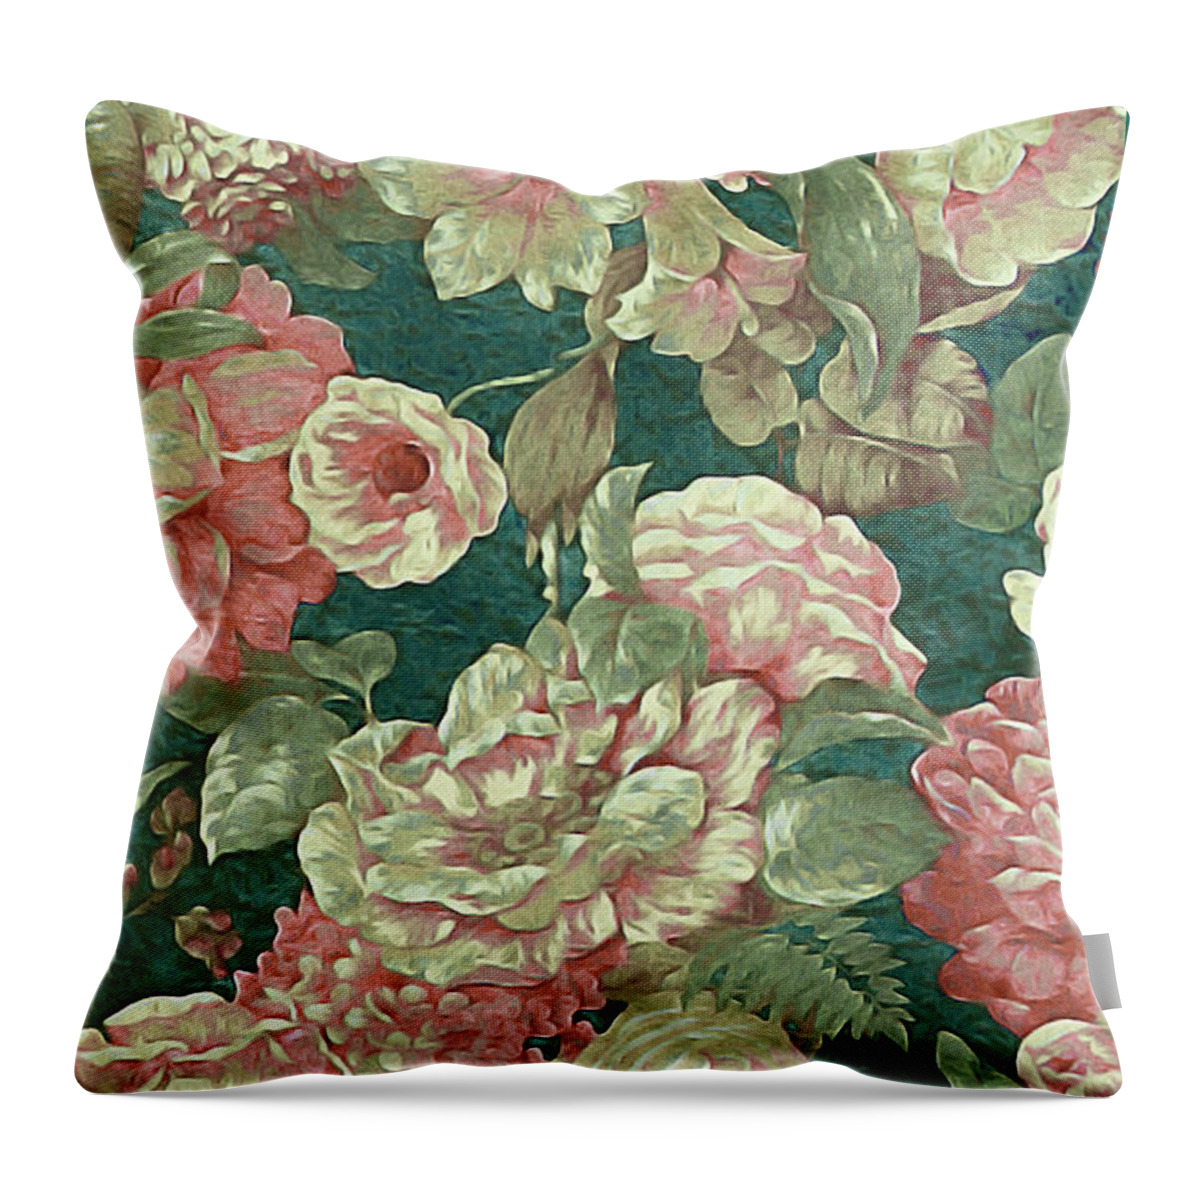 Vintage Floral Throw Pillow featuring the mixed media Victorian Garden by Susan Maxwell Schmidt